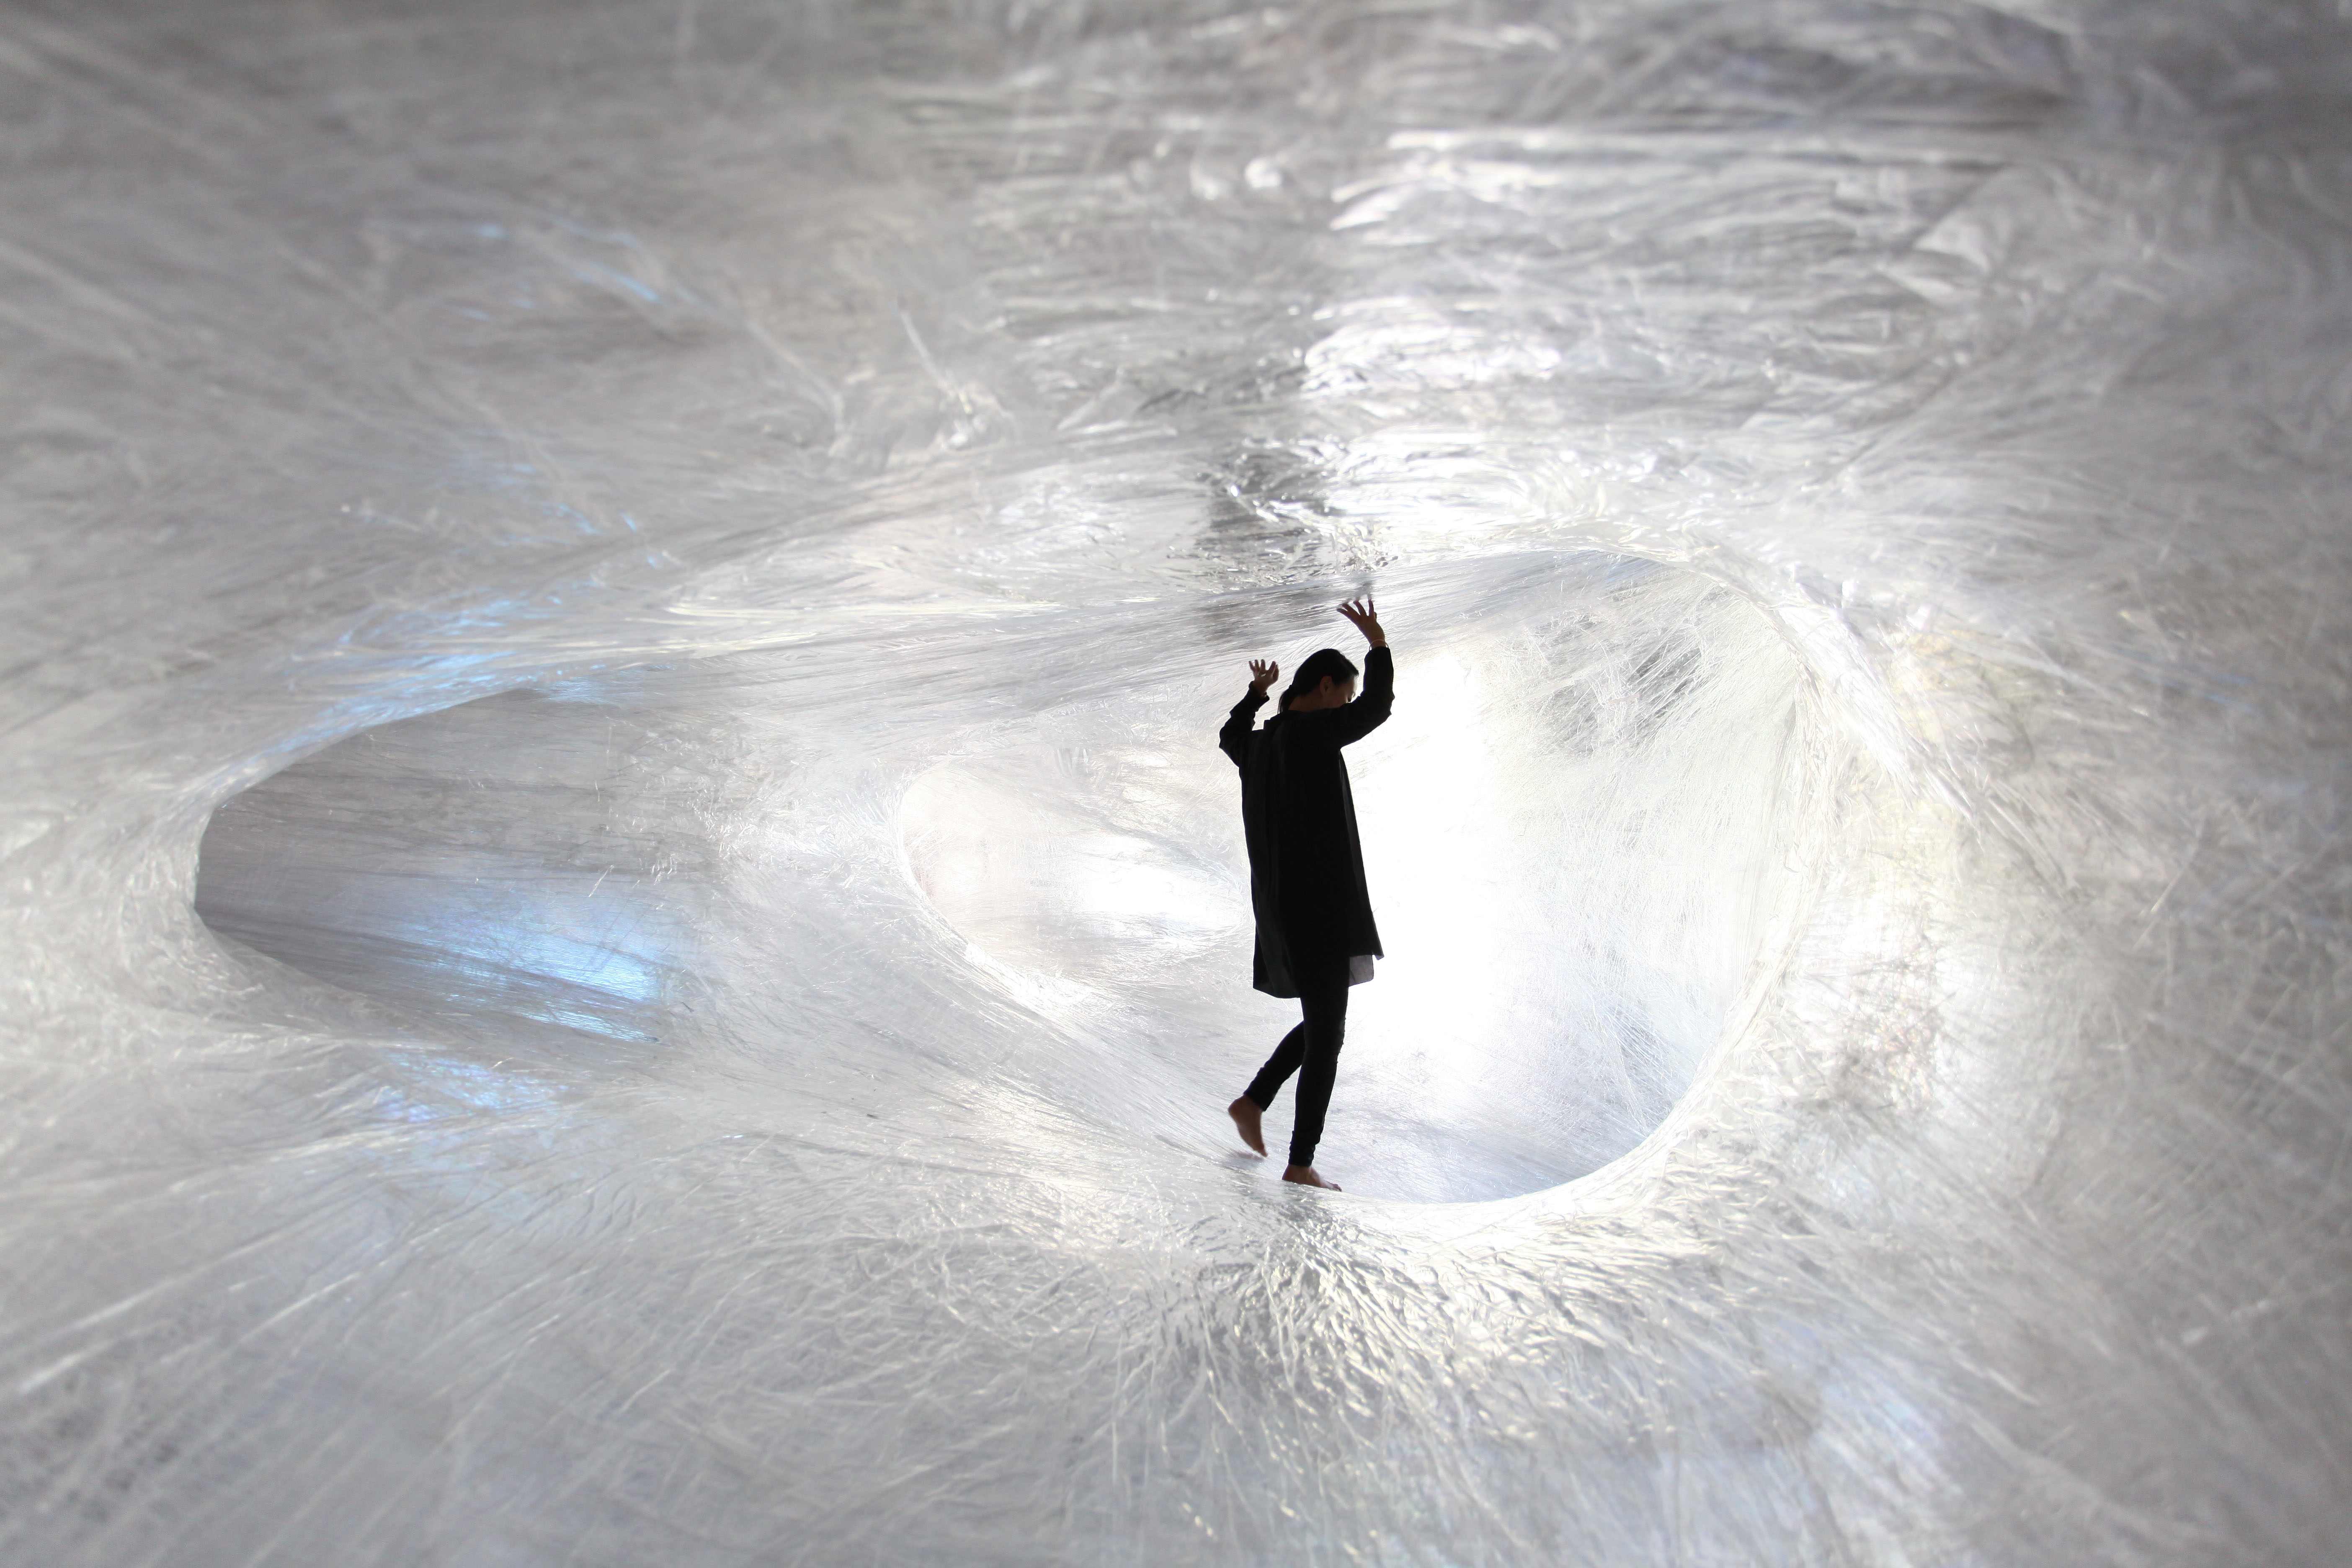 Installation view. Foto: Numen/For Use